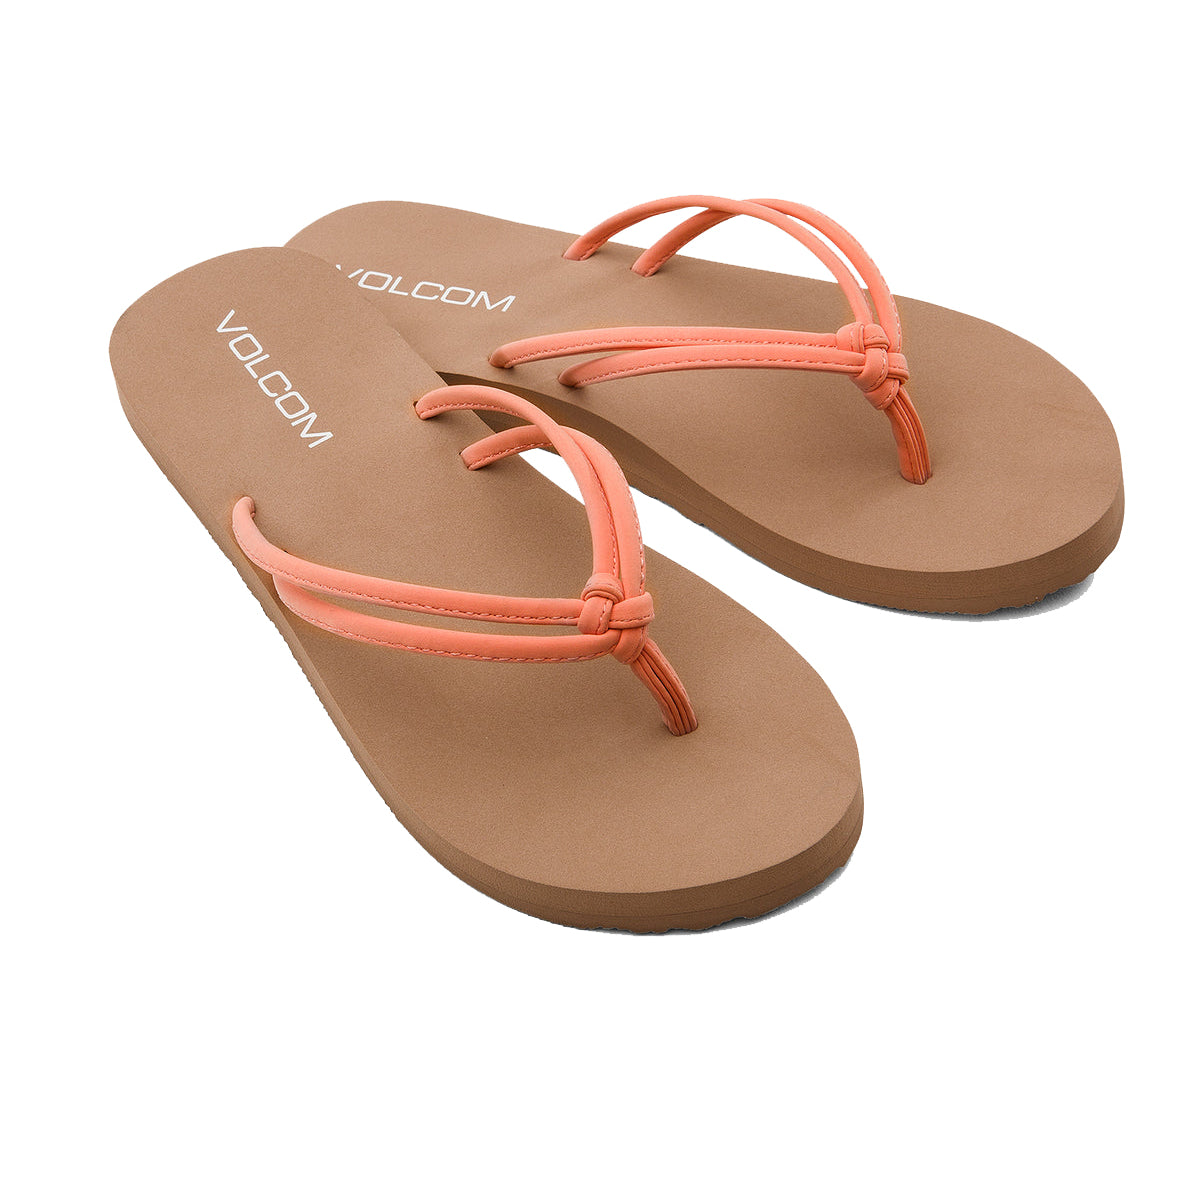 Volcom Forever and Ever Big Youth Girls Sandal PAY-Papaya 12 C